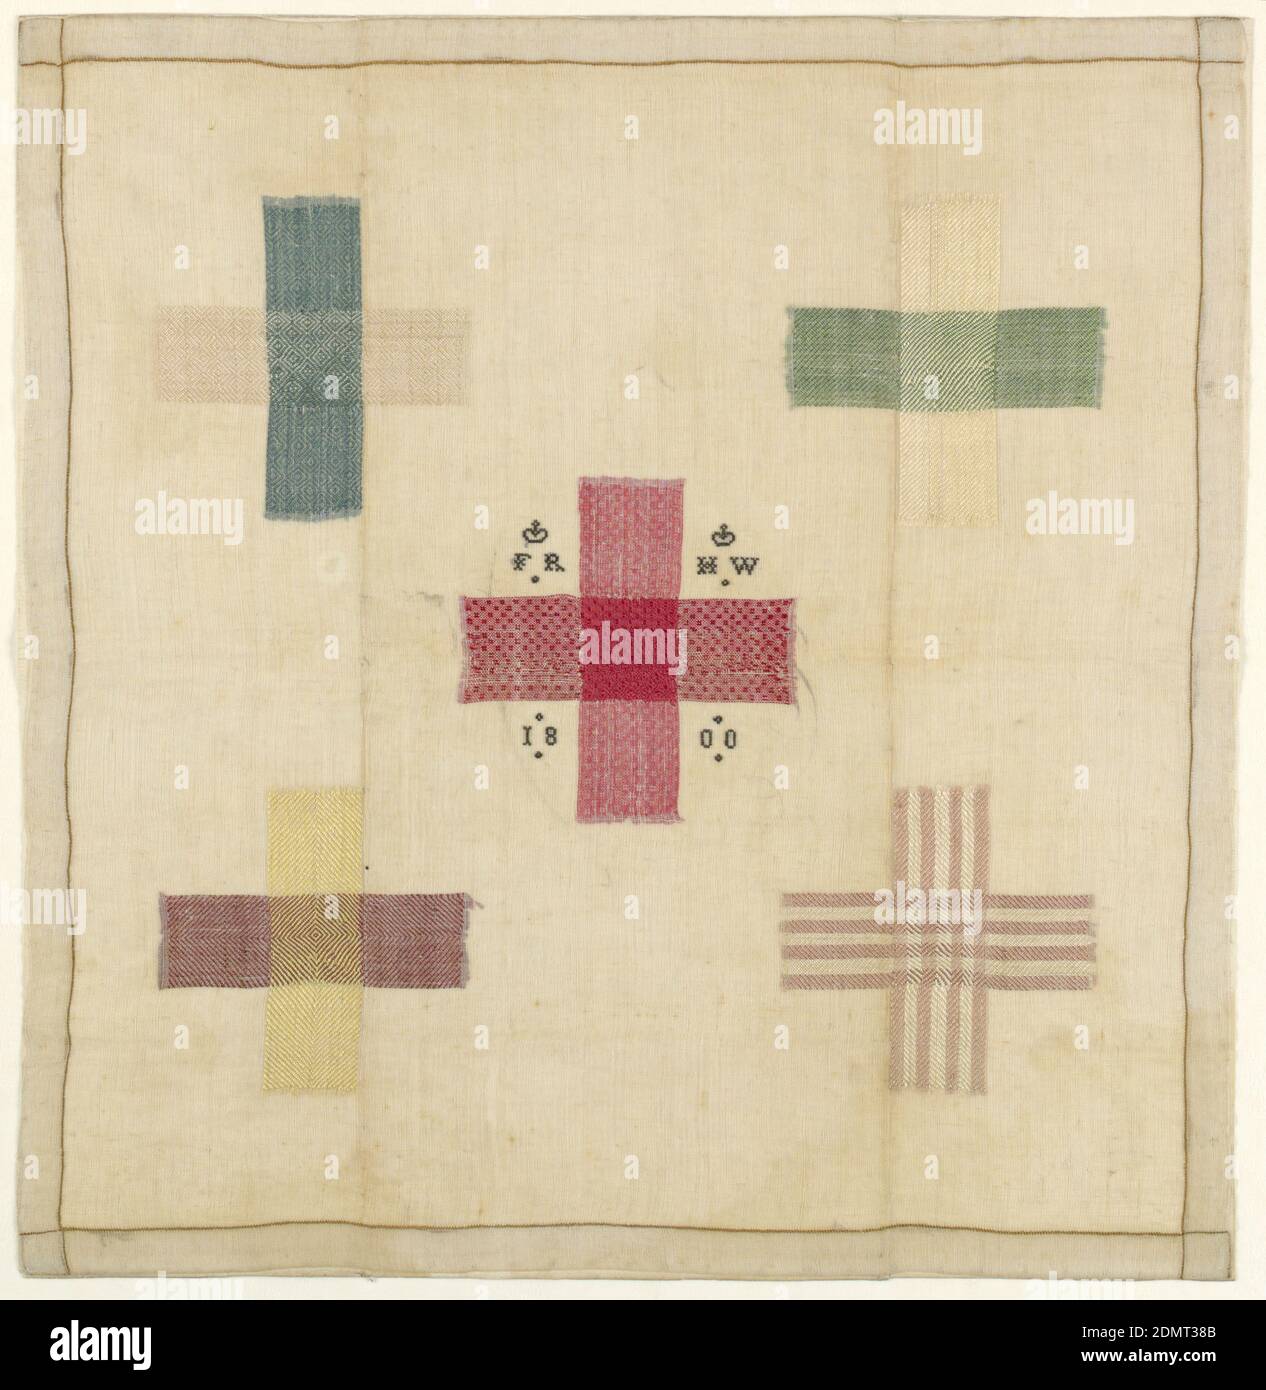 Darning sampler, Hannah Walne, Medium: linen, silk and paper backing Technique: embroidery, Handkerchief embroidered with five darning crosses on sheer linen. The initials FR and HW surmonted by two crowns, and the date 1800 are worked in black silk; the crosses in green, yellow, cream and red., England, 1800, embroidery & stitching, Darning sampler Stock Photo